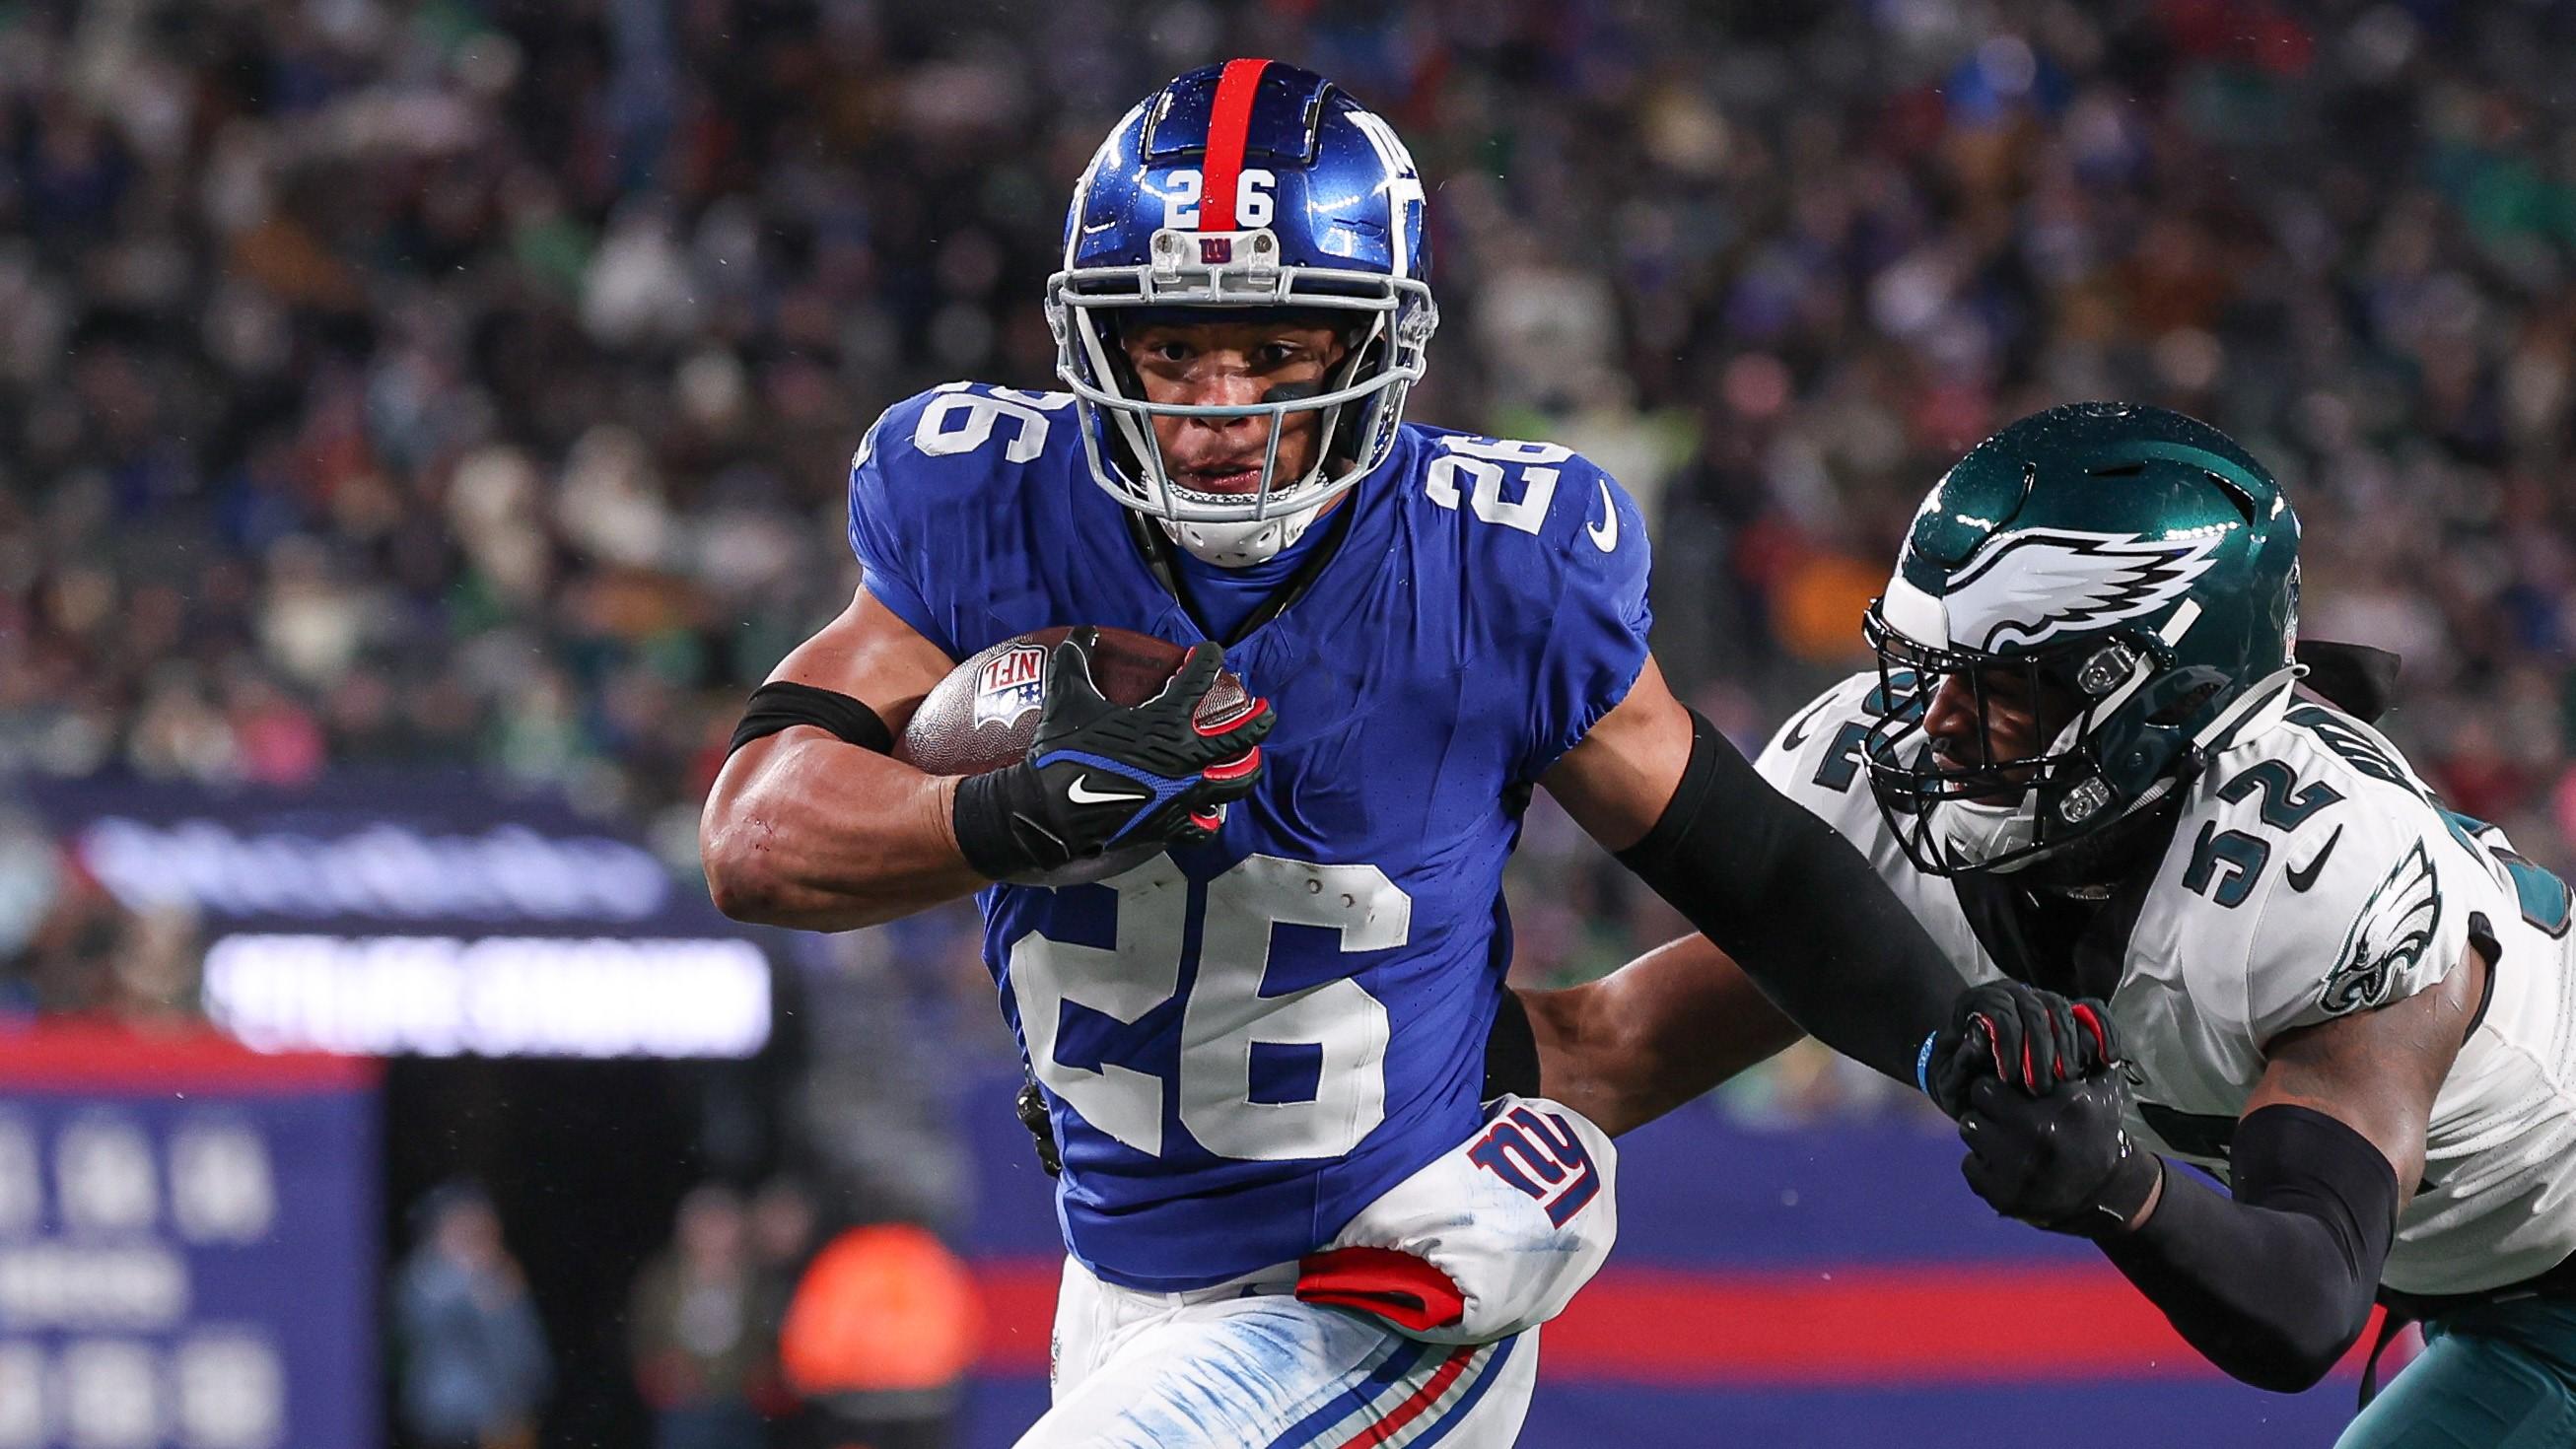 Jan 7, 2024; East Rutherford, New Jersey, USA; New York Giants running back Saquon Barkley (26) breaks a tackle by Philadelphia Eagles linebacker Zach Cunningham (52) for a rushing touchdown during the first half at MetLife Stadium. Mandatory Credit: Vincent Carchietta-USA TODAY Sports / © Vincent Carchietta-USA TODAY Sports